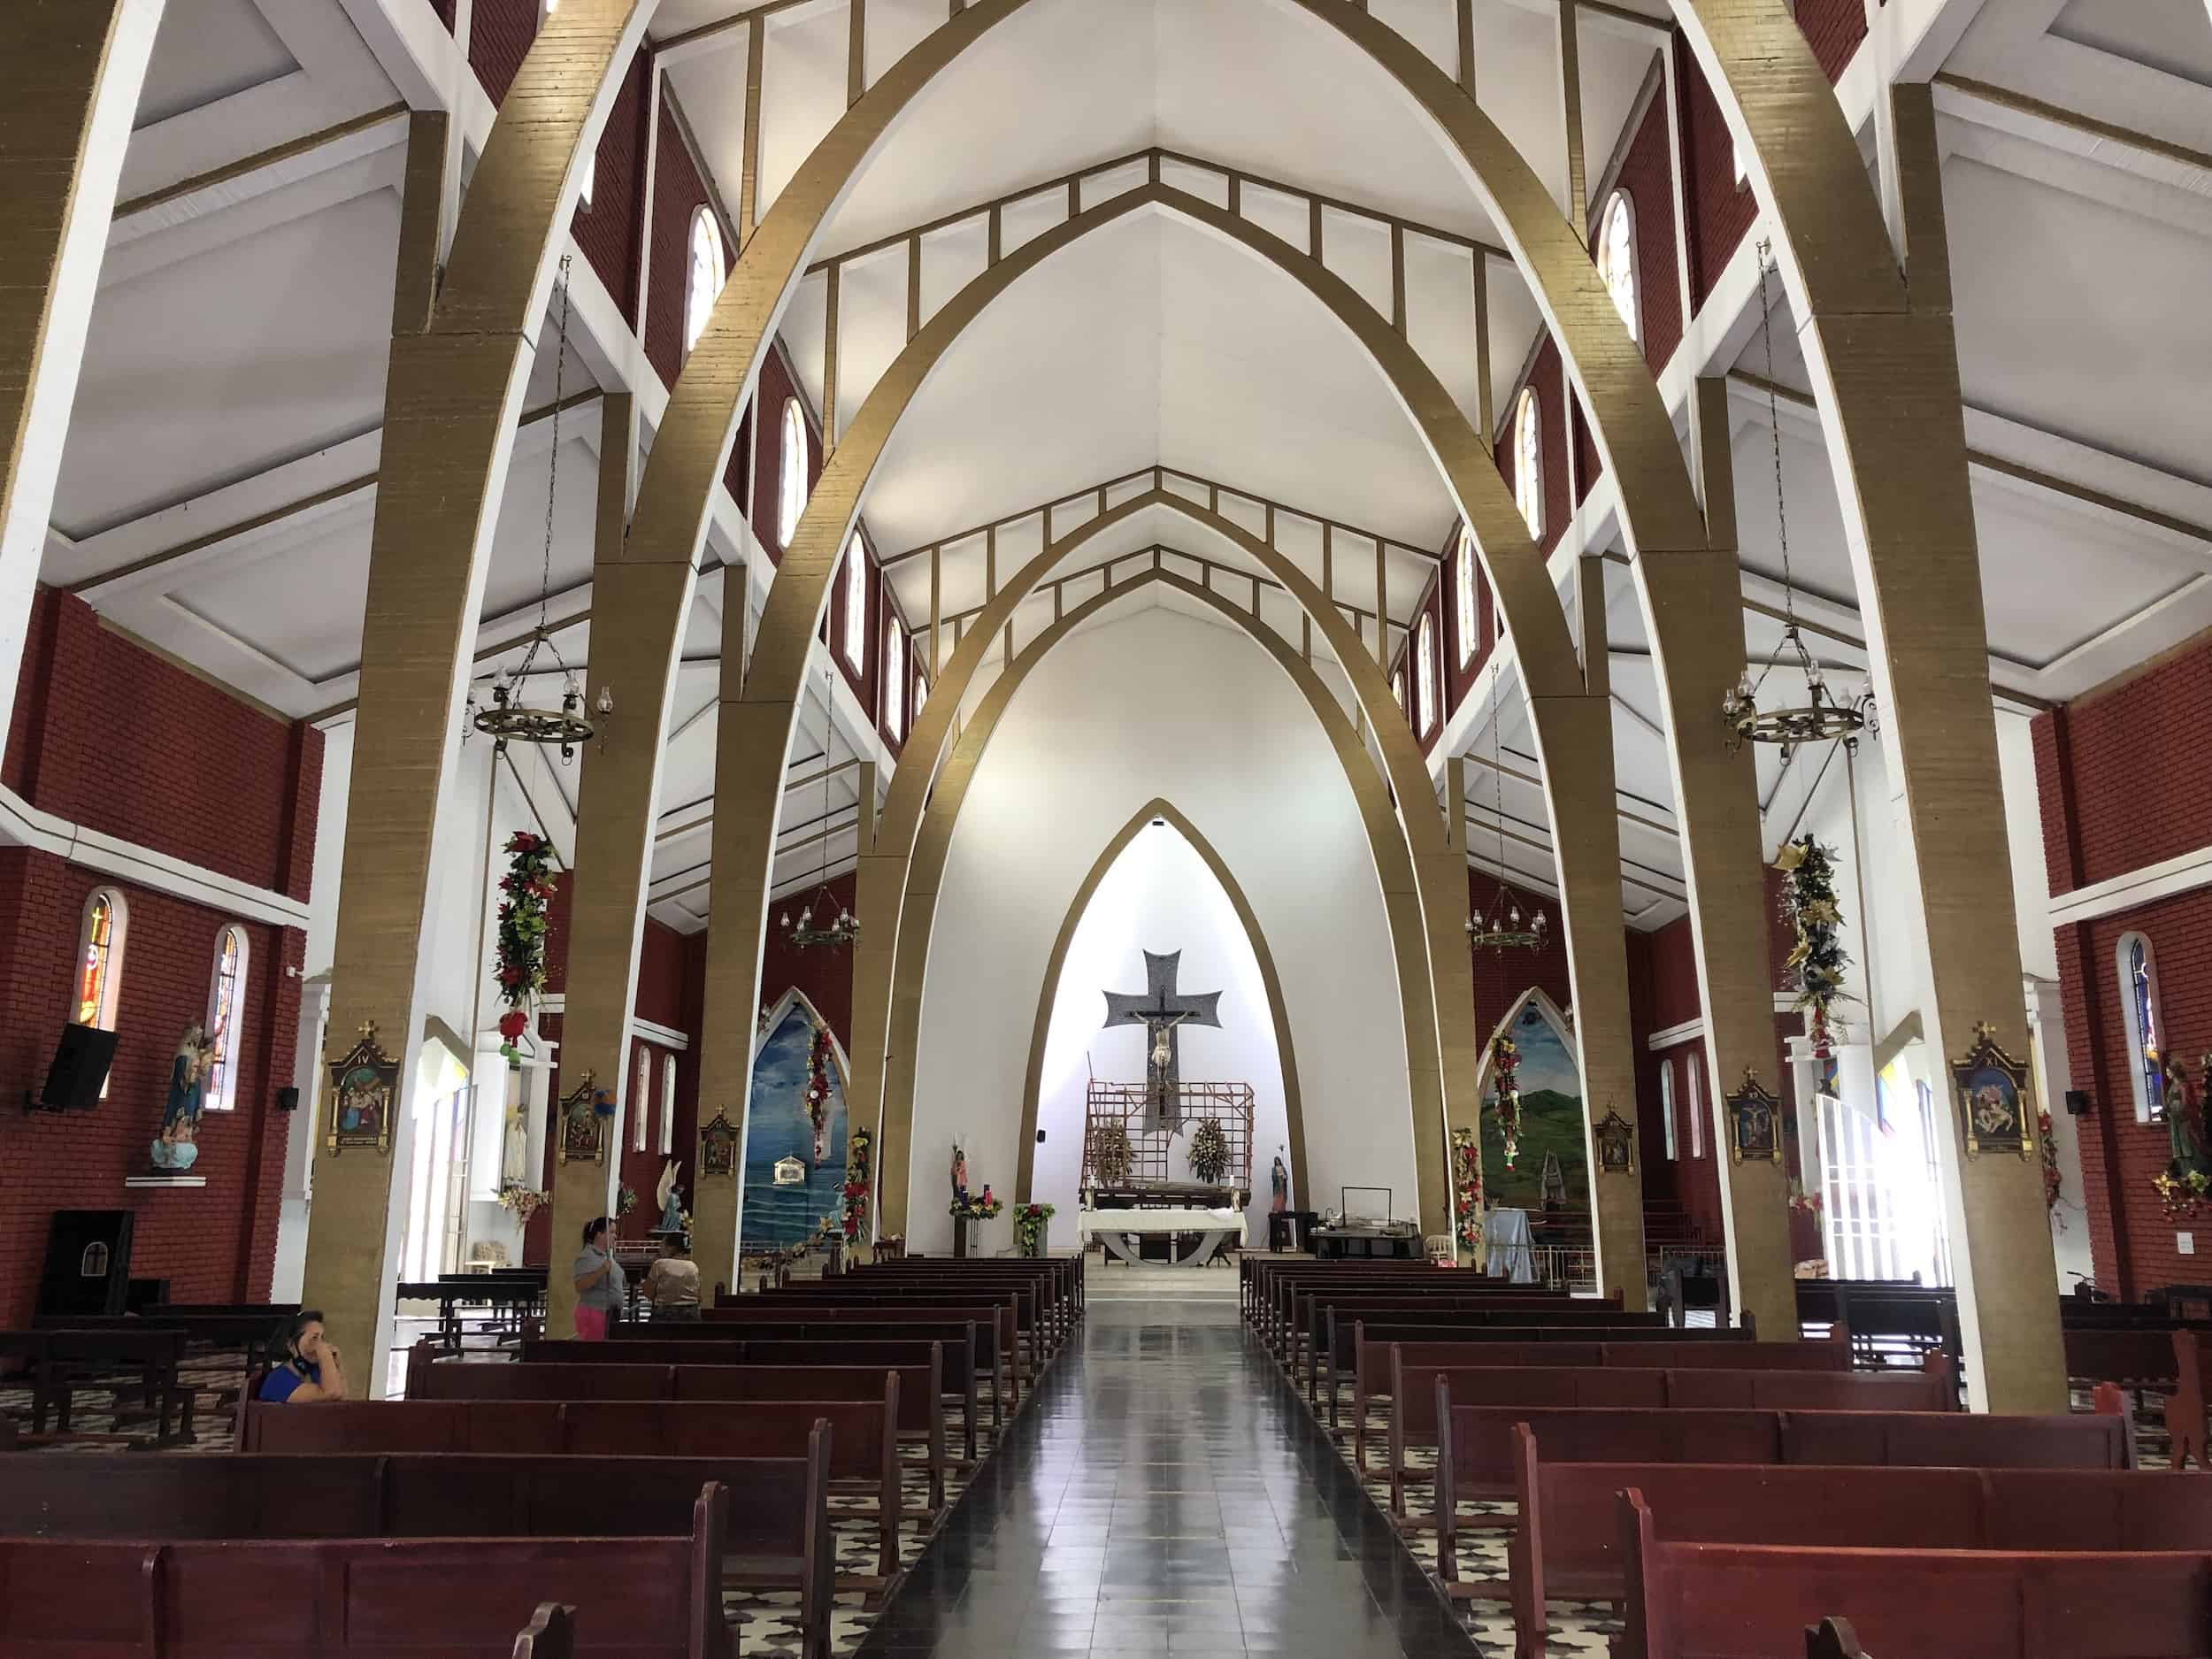 Our Lady of Consolation in Toro, Valle del Cauca, Colombia